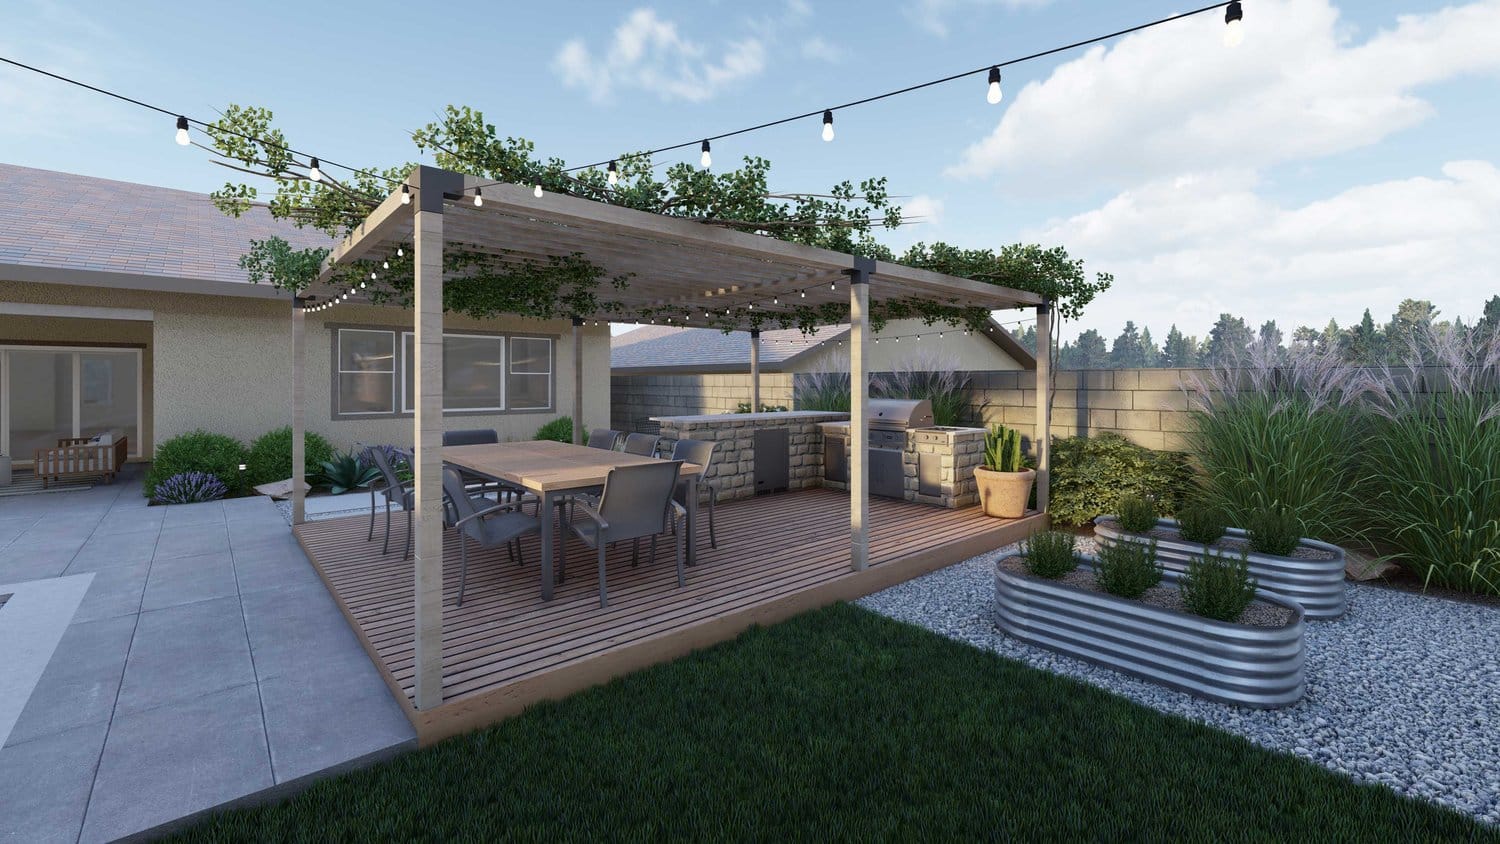 Thousand Oaks backyard deck patio with pergola over outdoor kitchen and dining area, alongside raised garden beds on the side